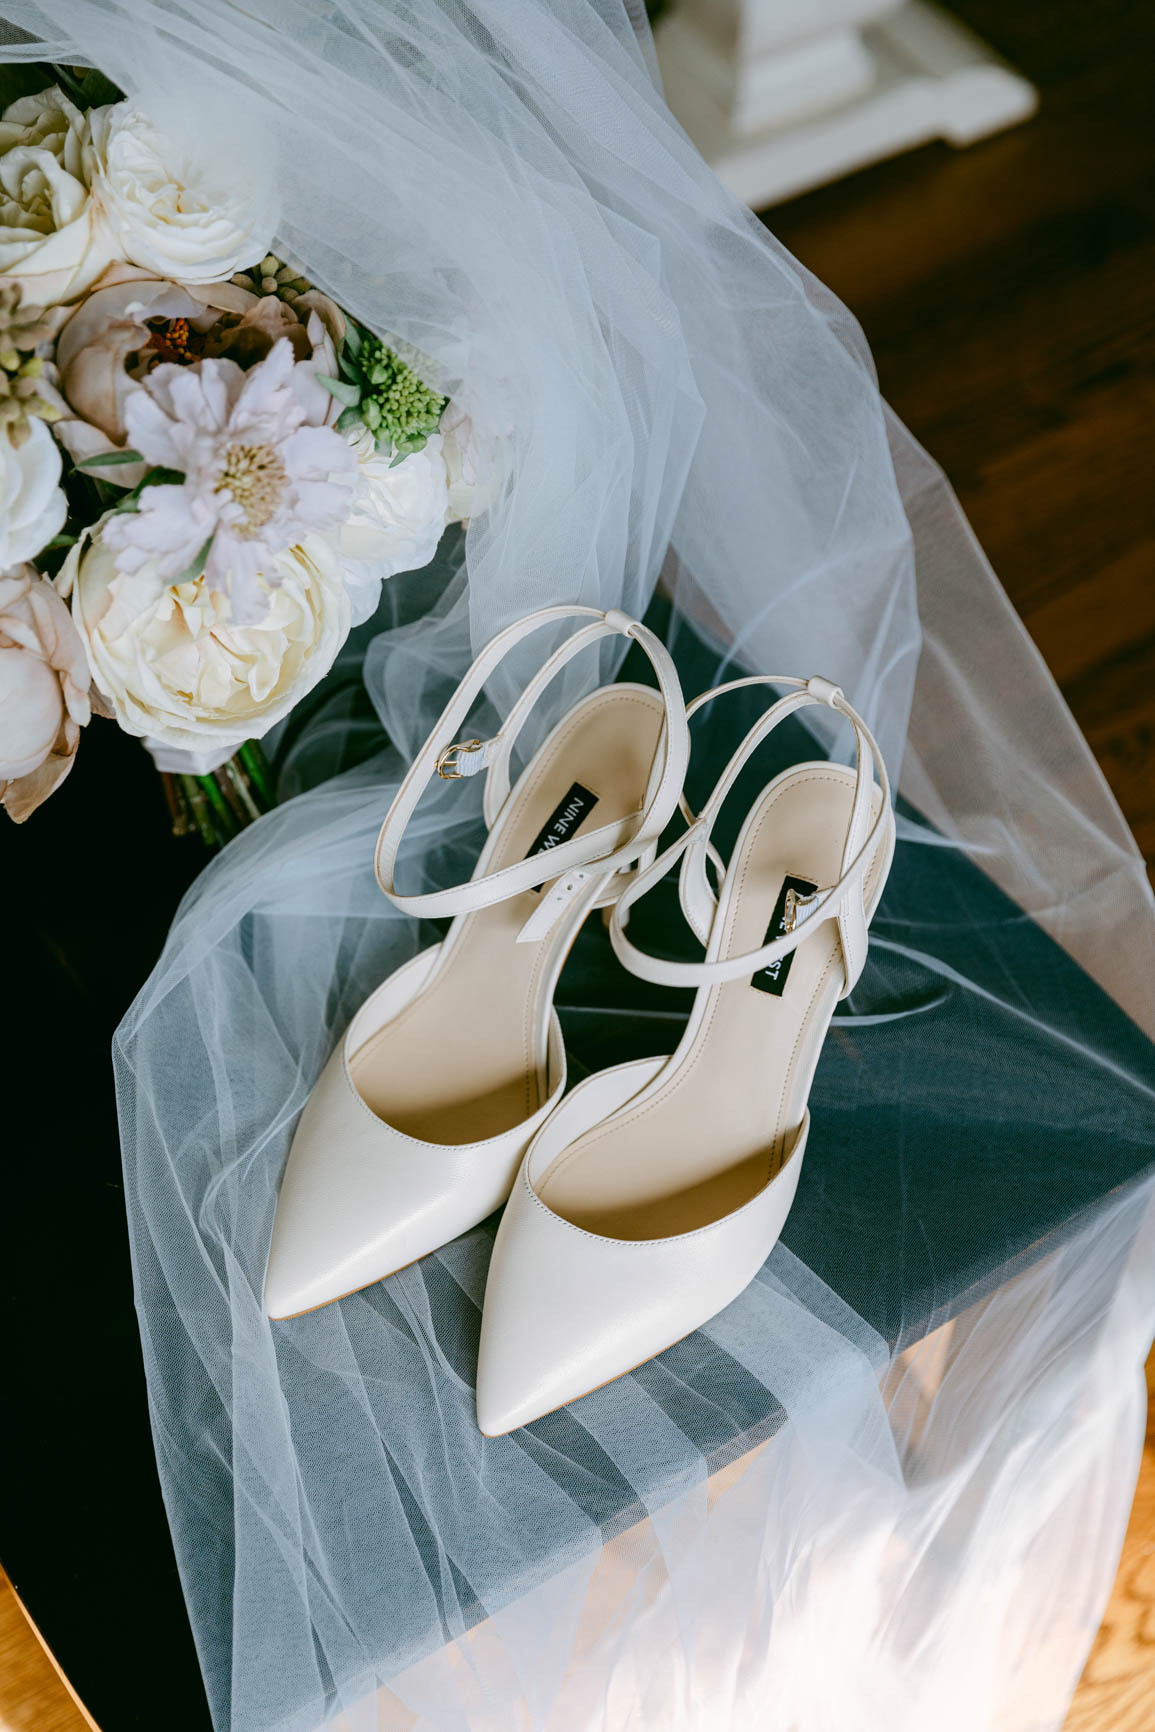 wedding detail of shoes shot by Nhieu Tang Photography | nhieutang.com